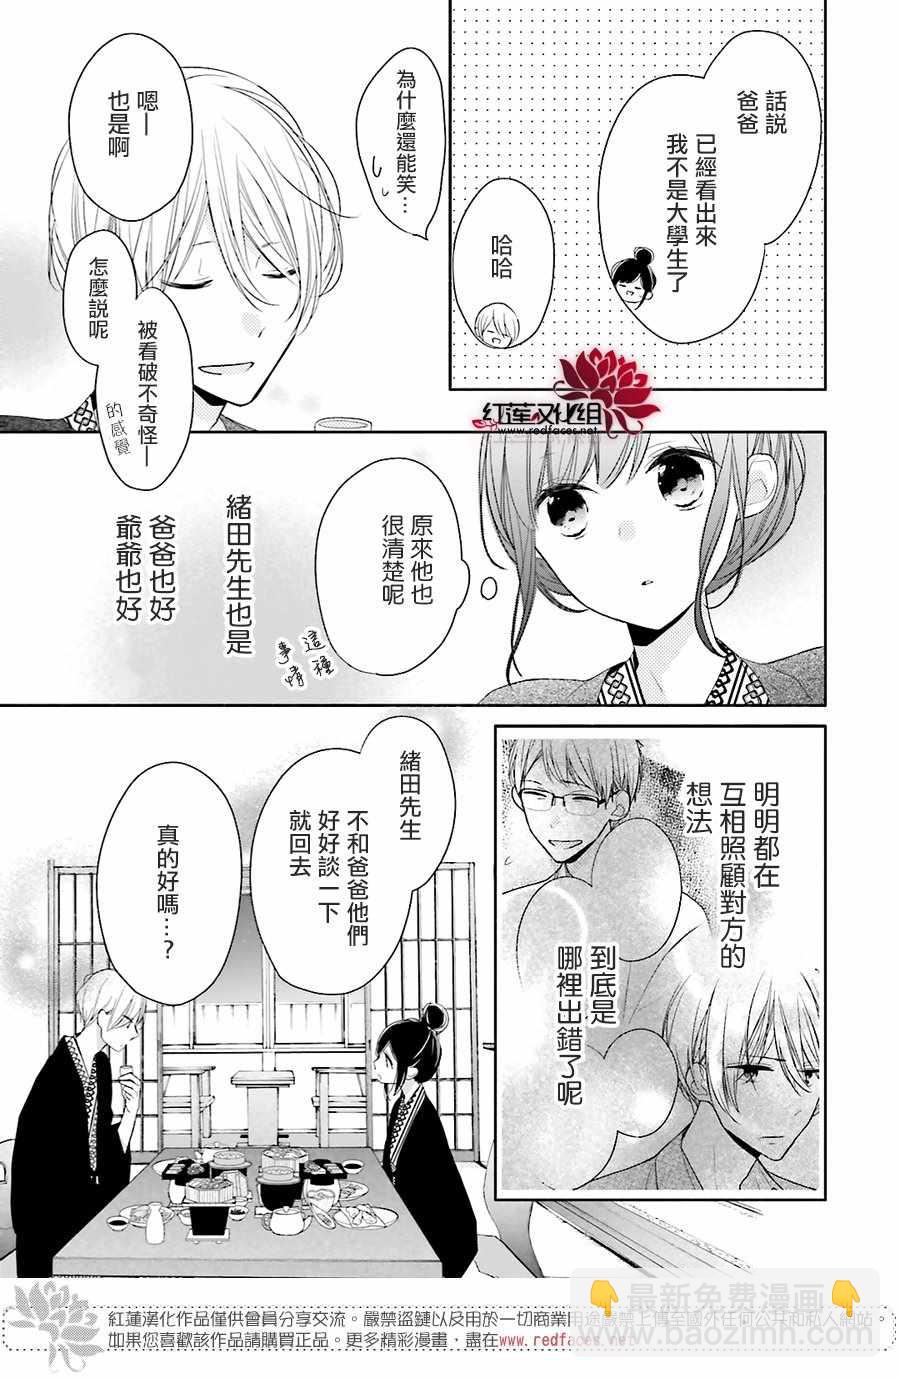 If given a second chance - 11话 - 3